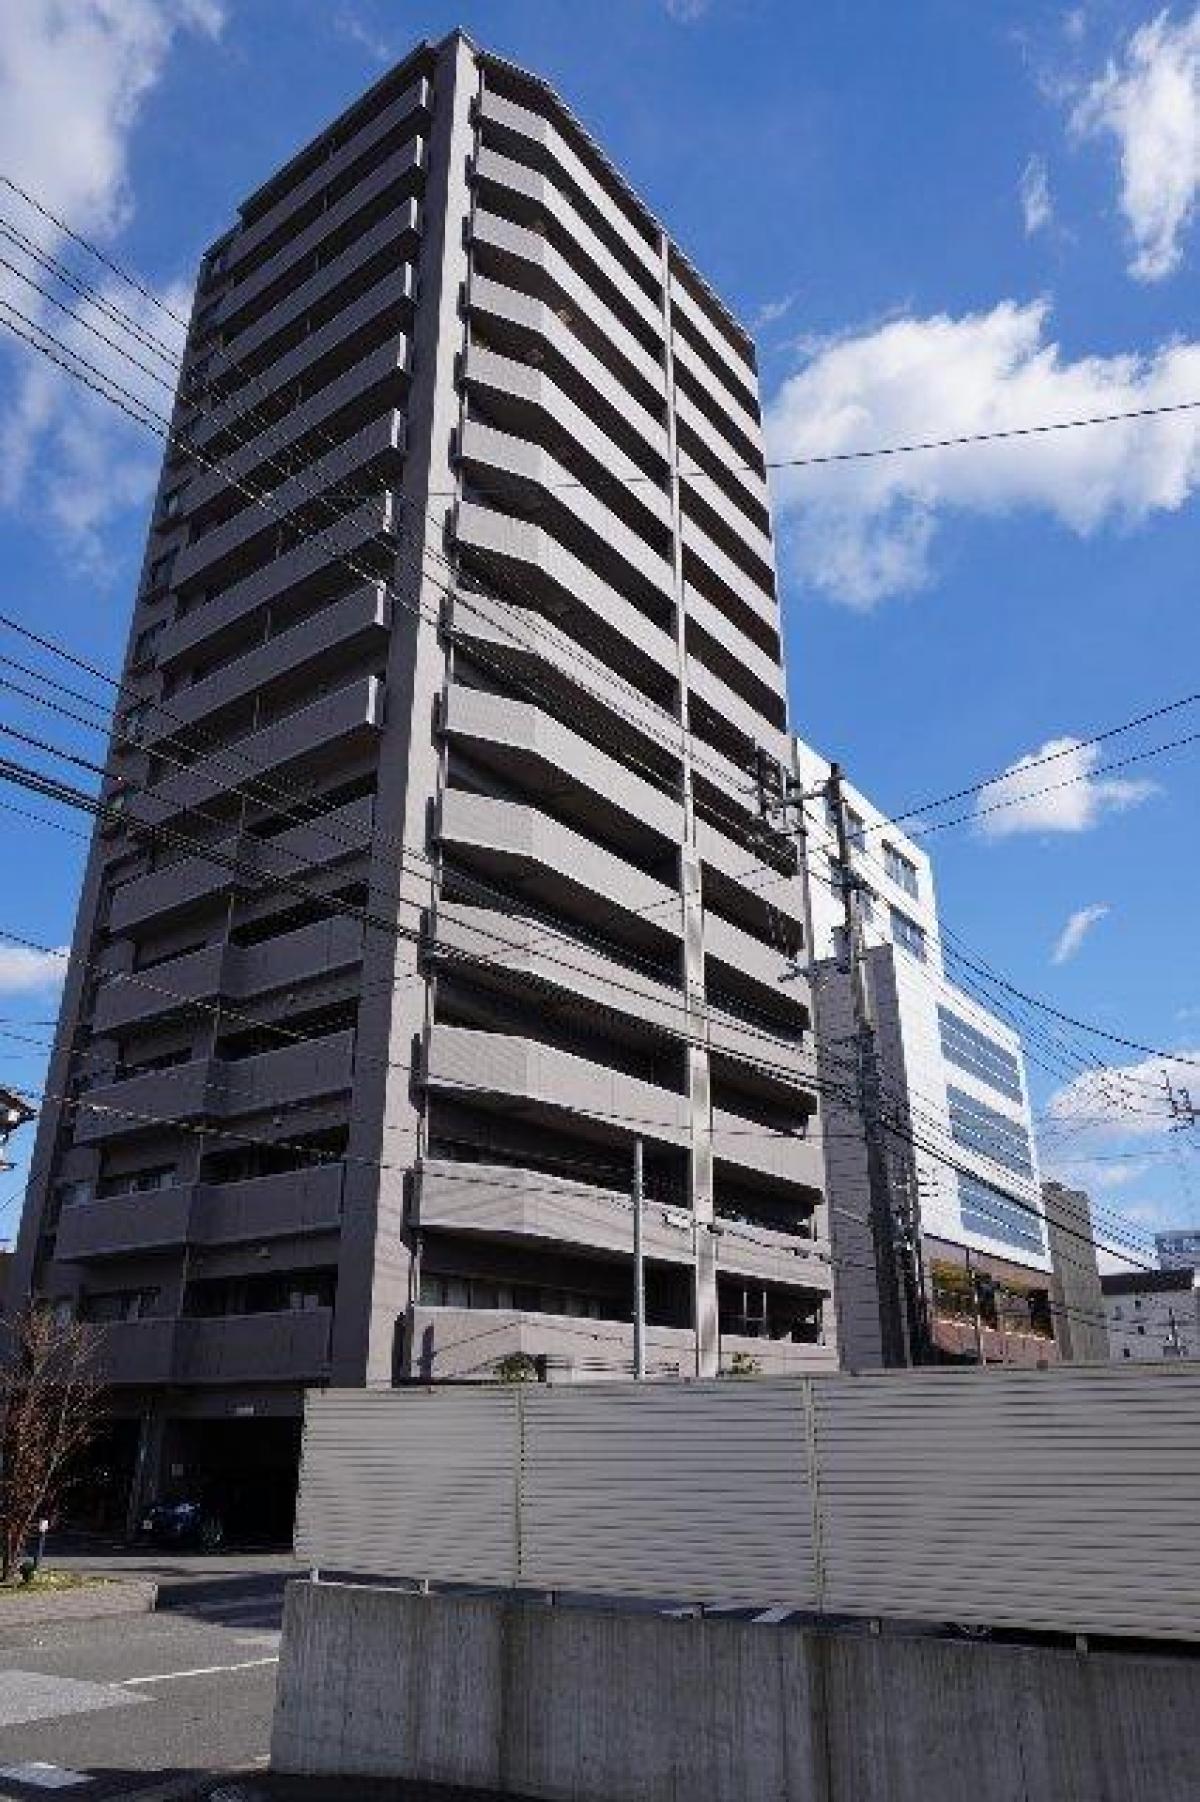 Picture of Apartment For Sale in Kochi Shi, Kochi, Japan